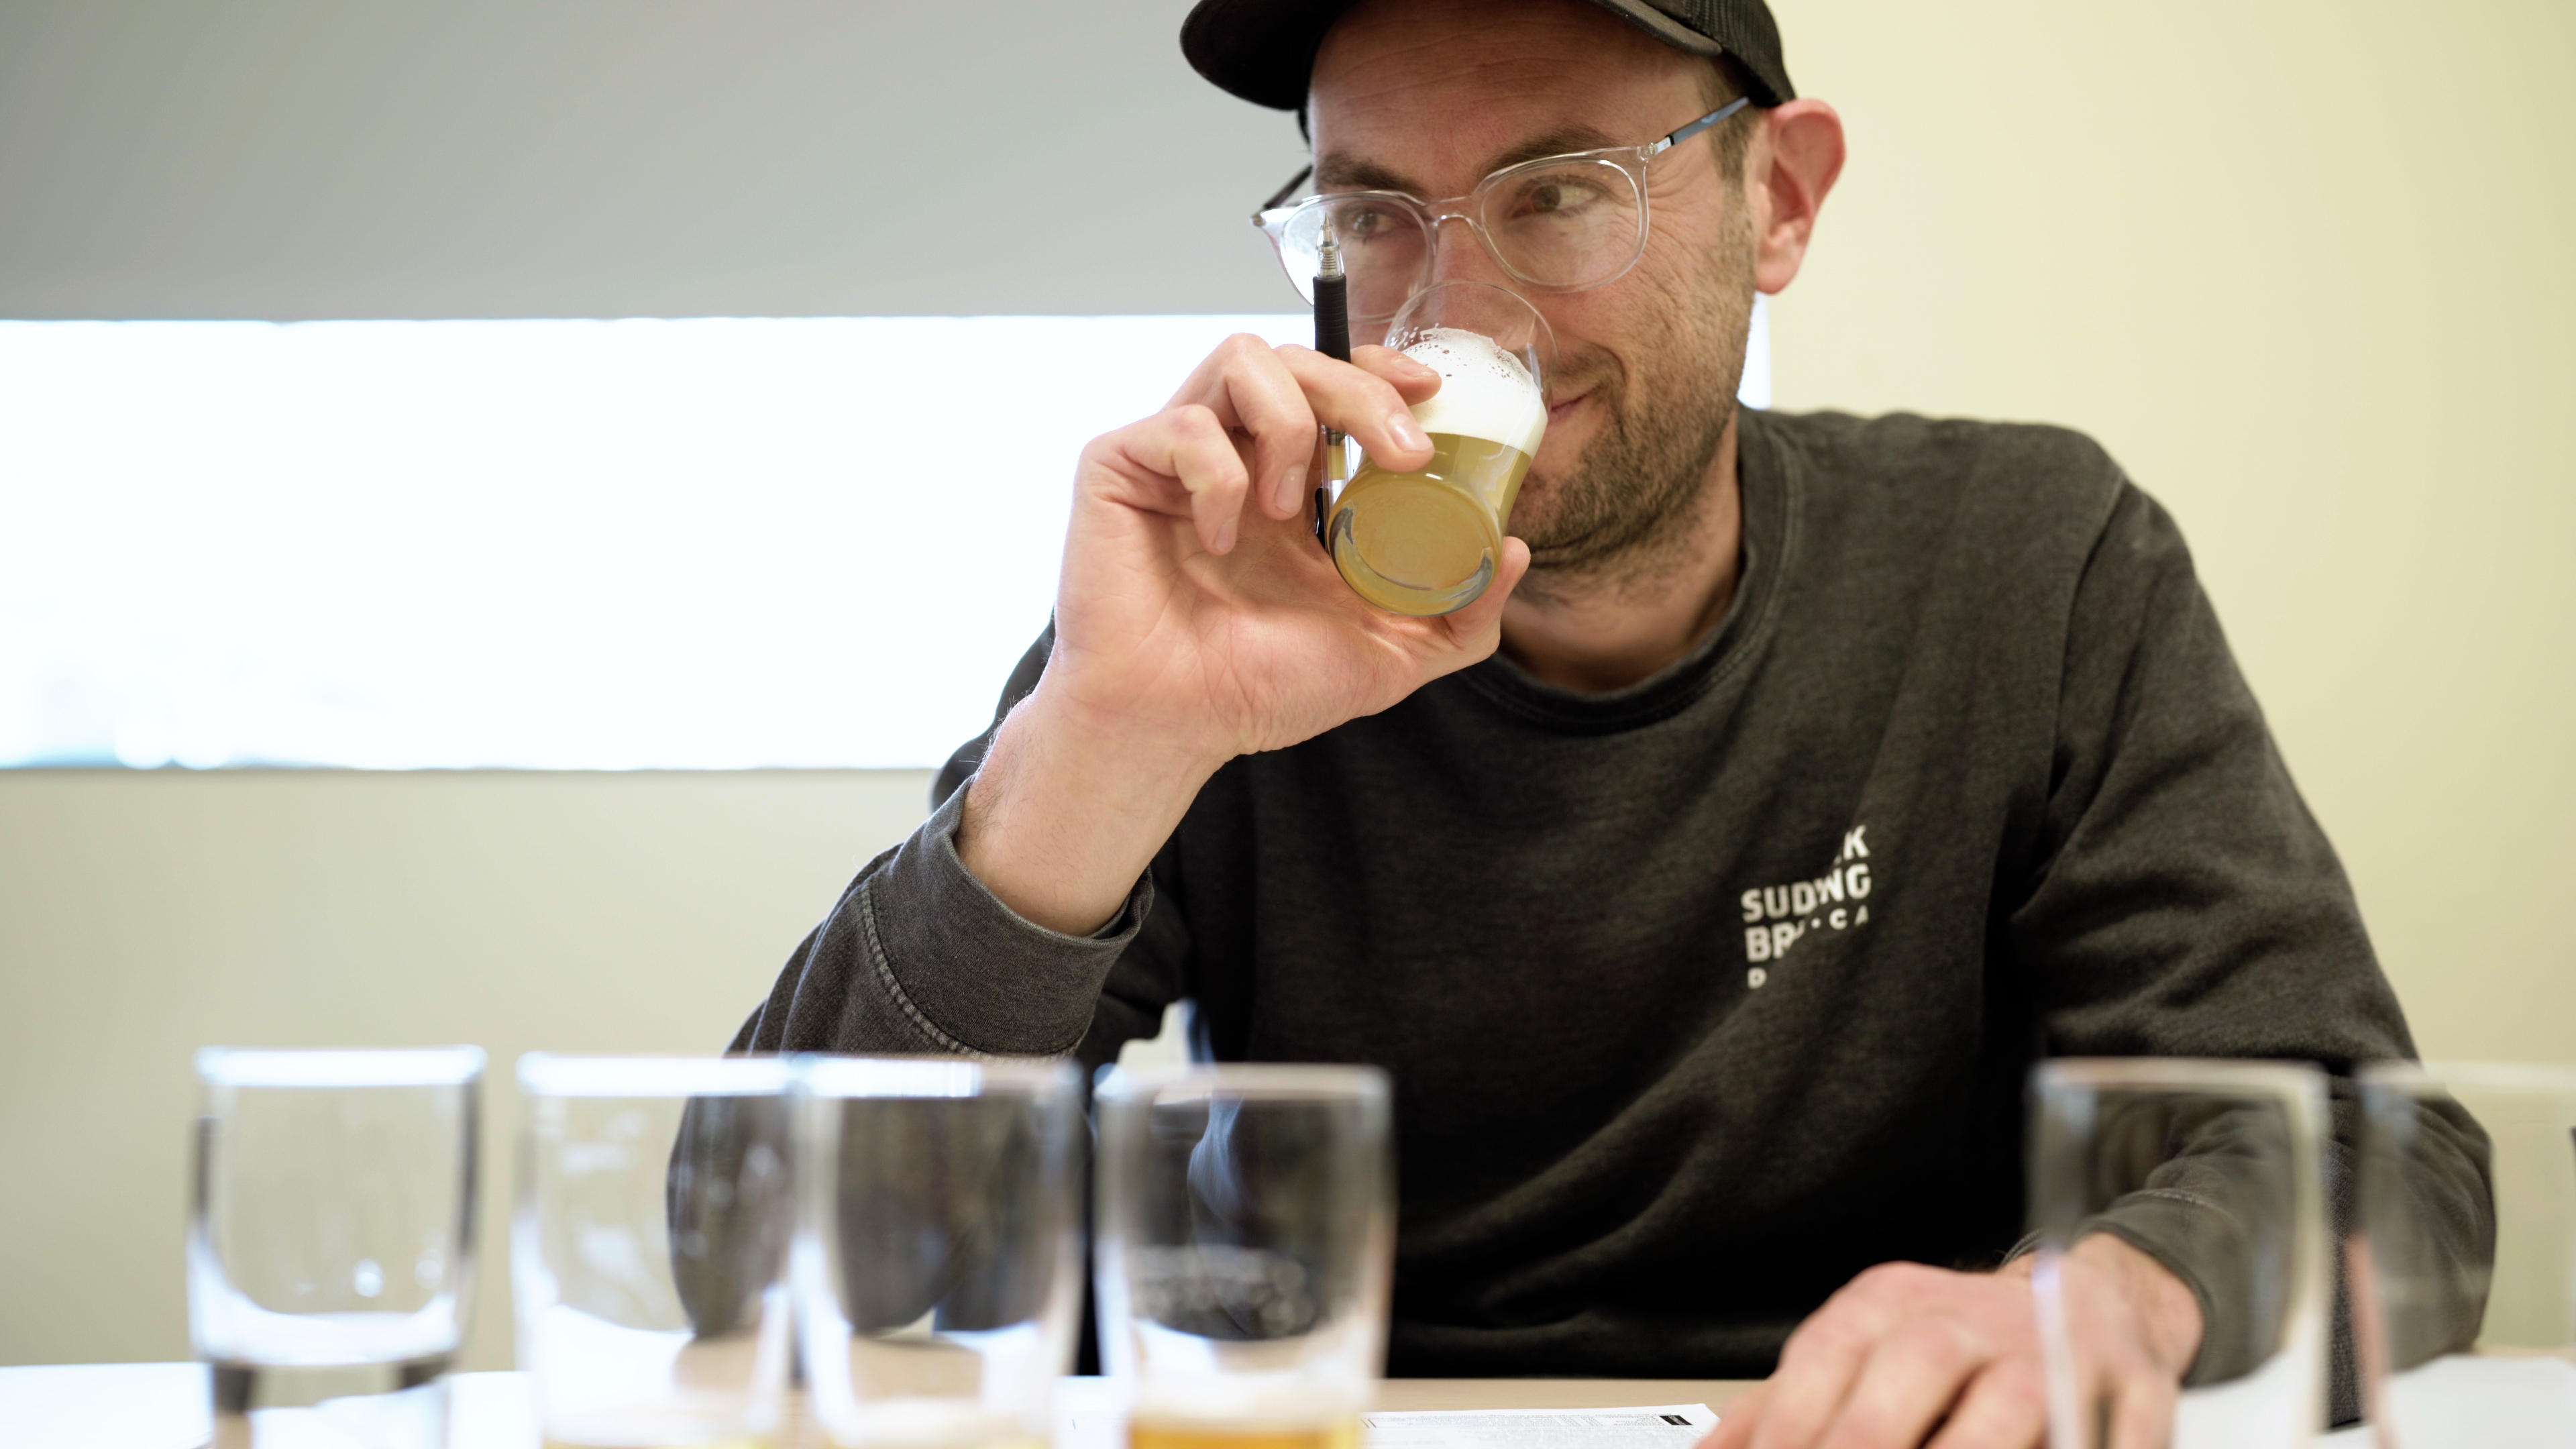 Tom Stull, head brewer at Sudwerk Brewing Co. and one of the judges